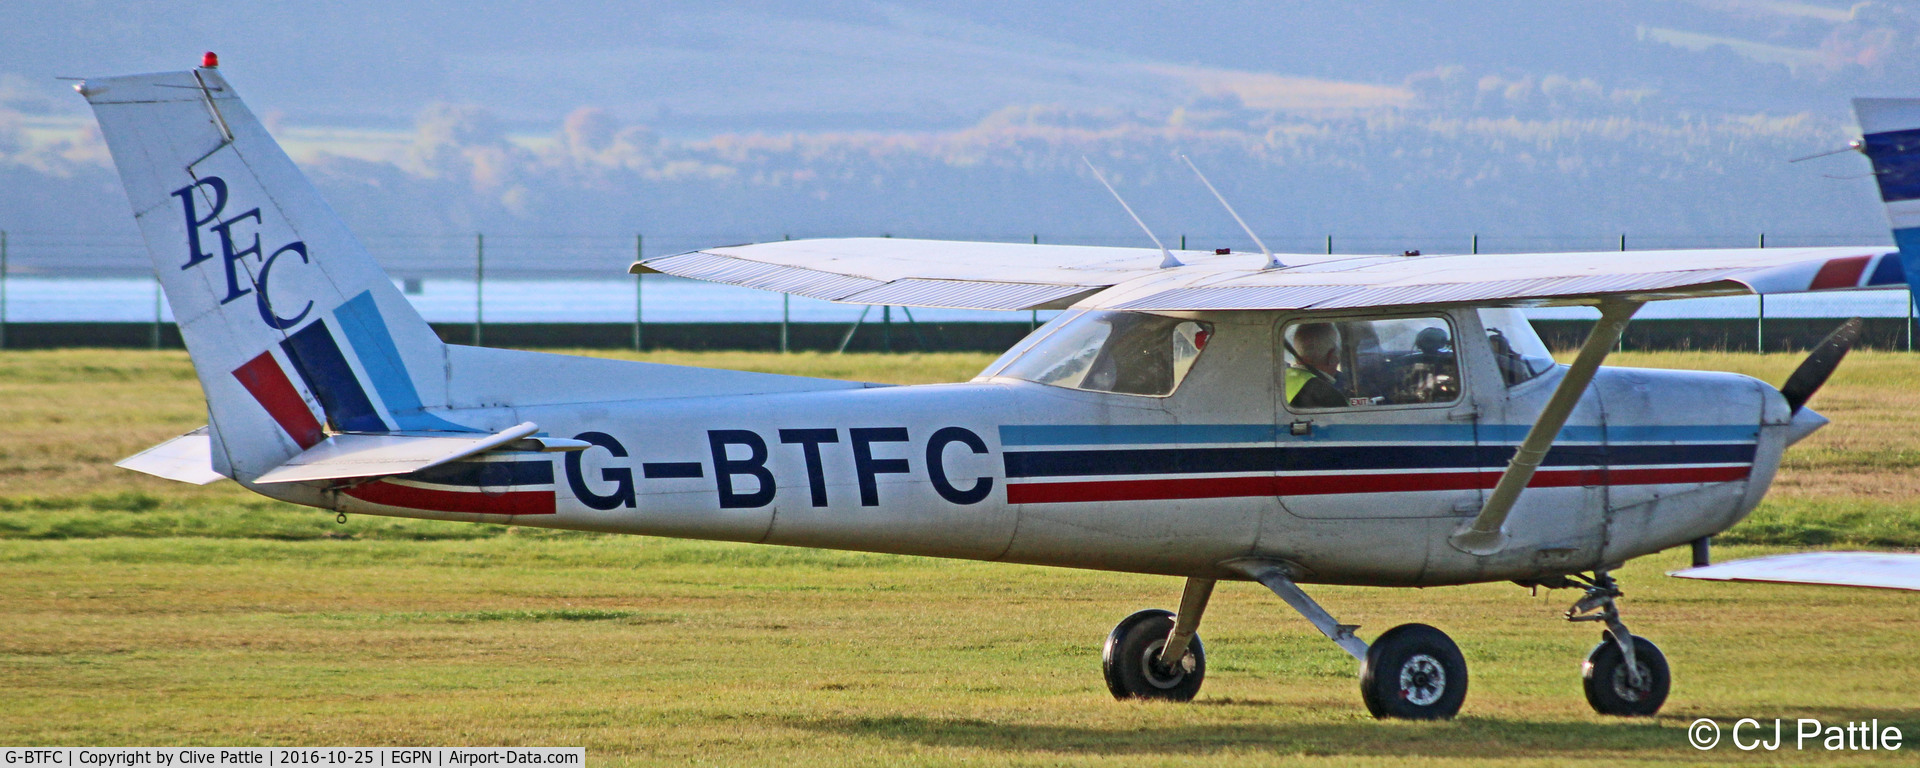 G-BTFC, 1979 Reims F152 C/N 1668, Ex Tayside Aviation aircraft visiting its former base at Dundee EGPN